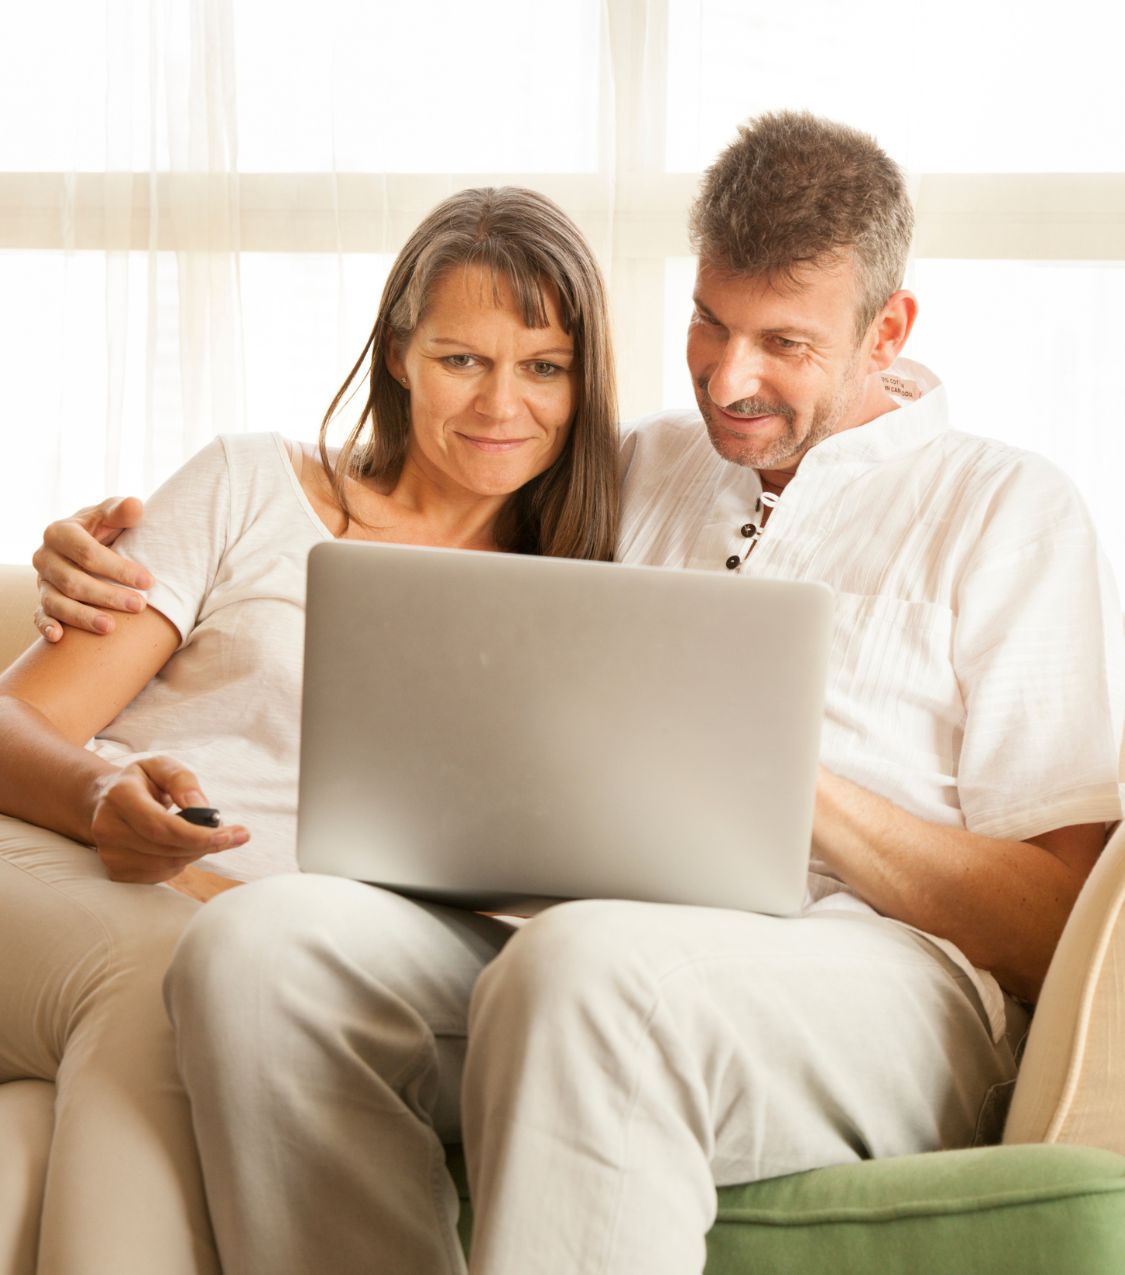 A couple, a woman, and a man sit closely, gazing at a laptop screen. Symbolizing a pair navigating the aftermath of infidelity, seeking solace through an infidelity recovery program. Initiate your healing journey by scheduling a free consultation with us today, available in the United States, New York, Colorado, North Carolina, Ohio, Toronto, Canada, California and globally.